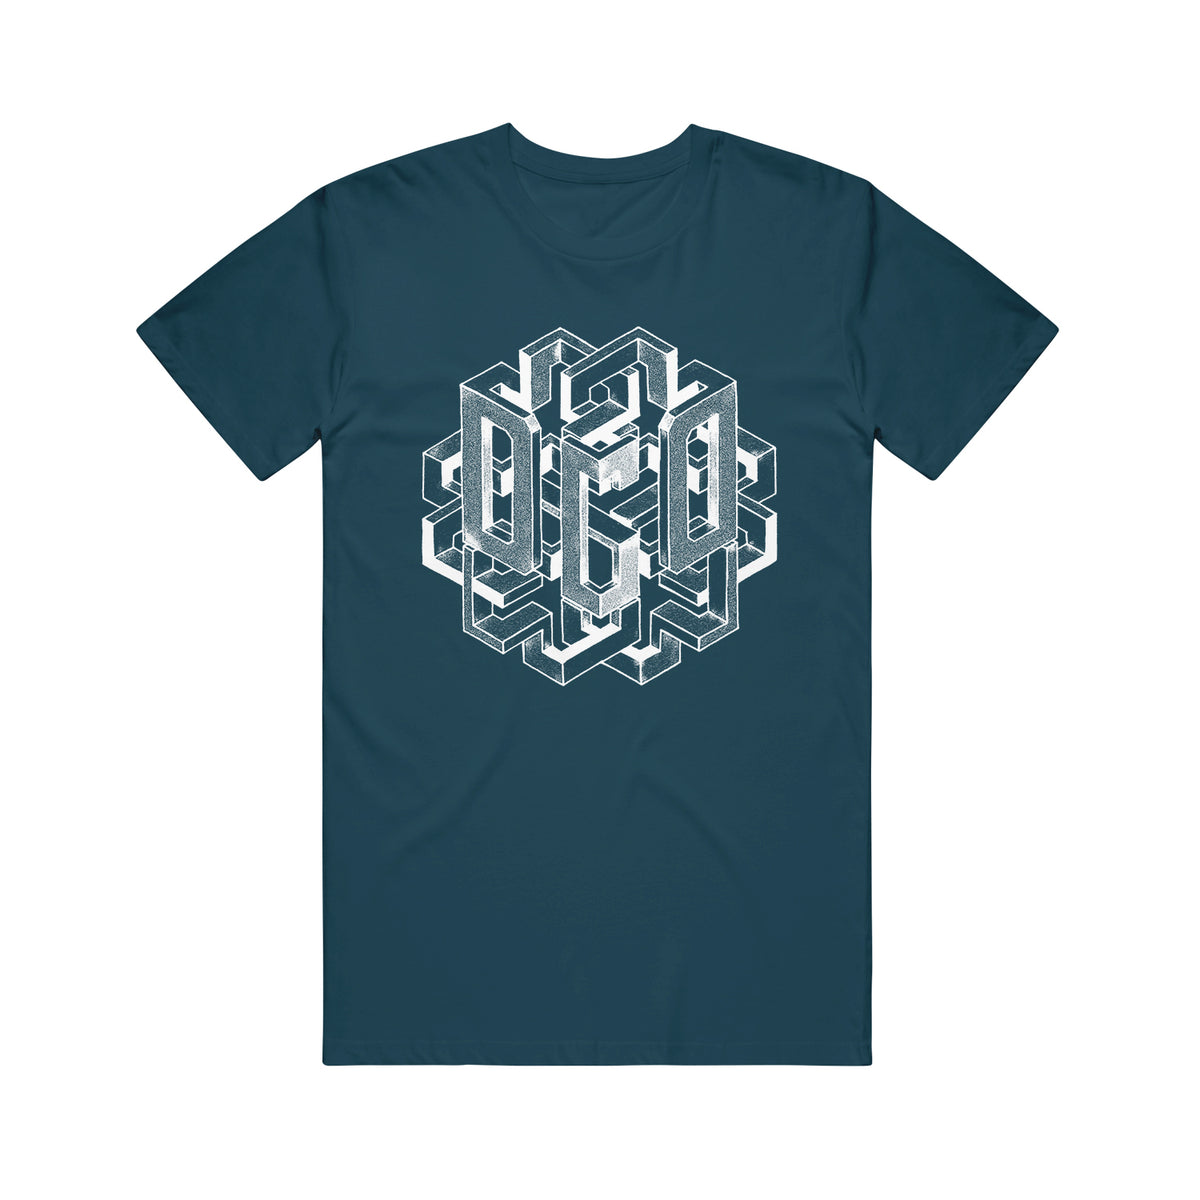 image of a deep teal tee shirt on a white background. tee has a full center chest print in white of geometric boxes with the letters D G D 